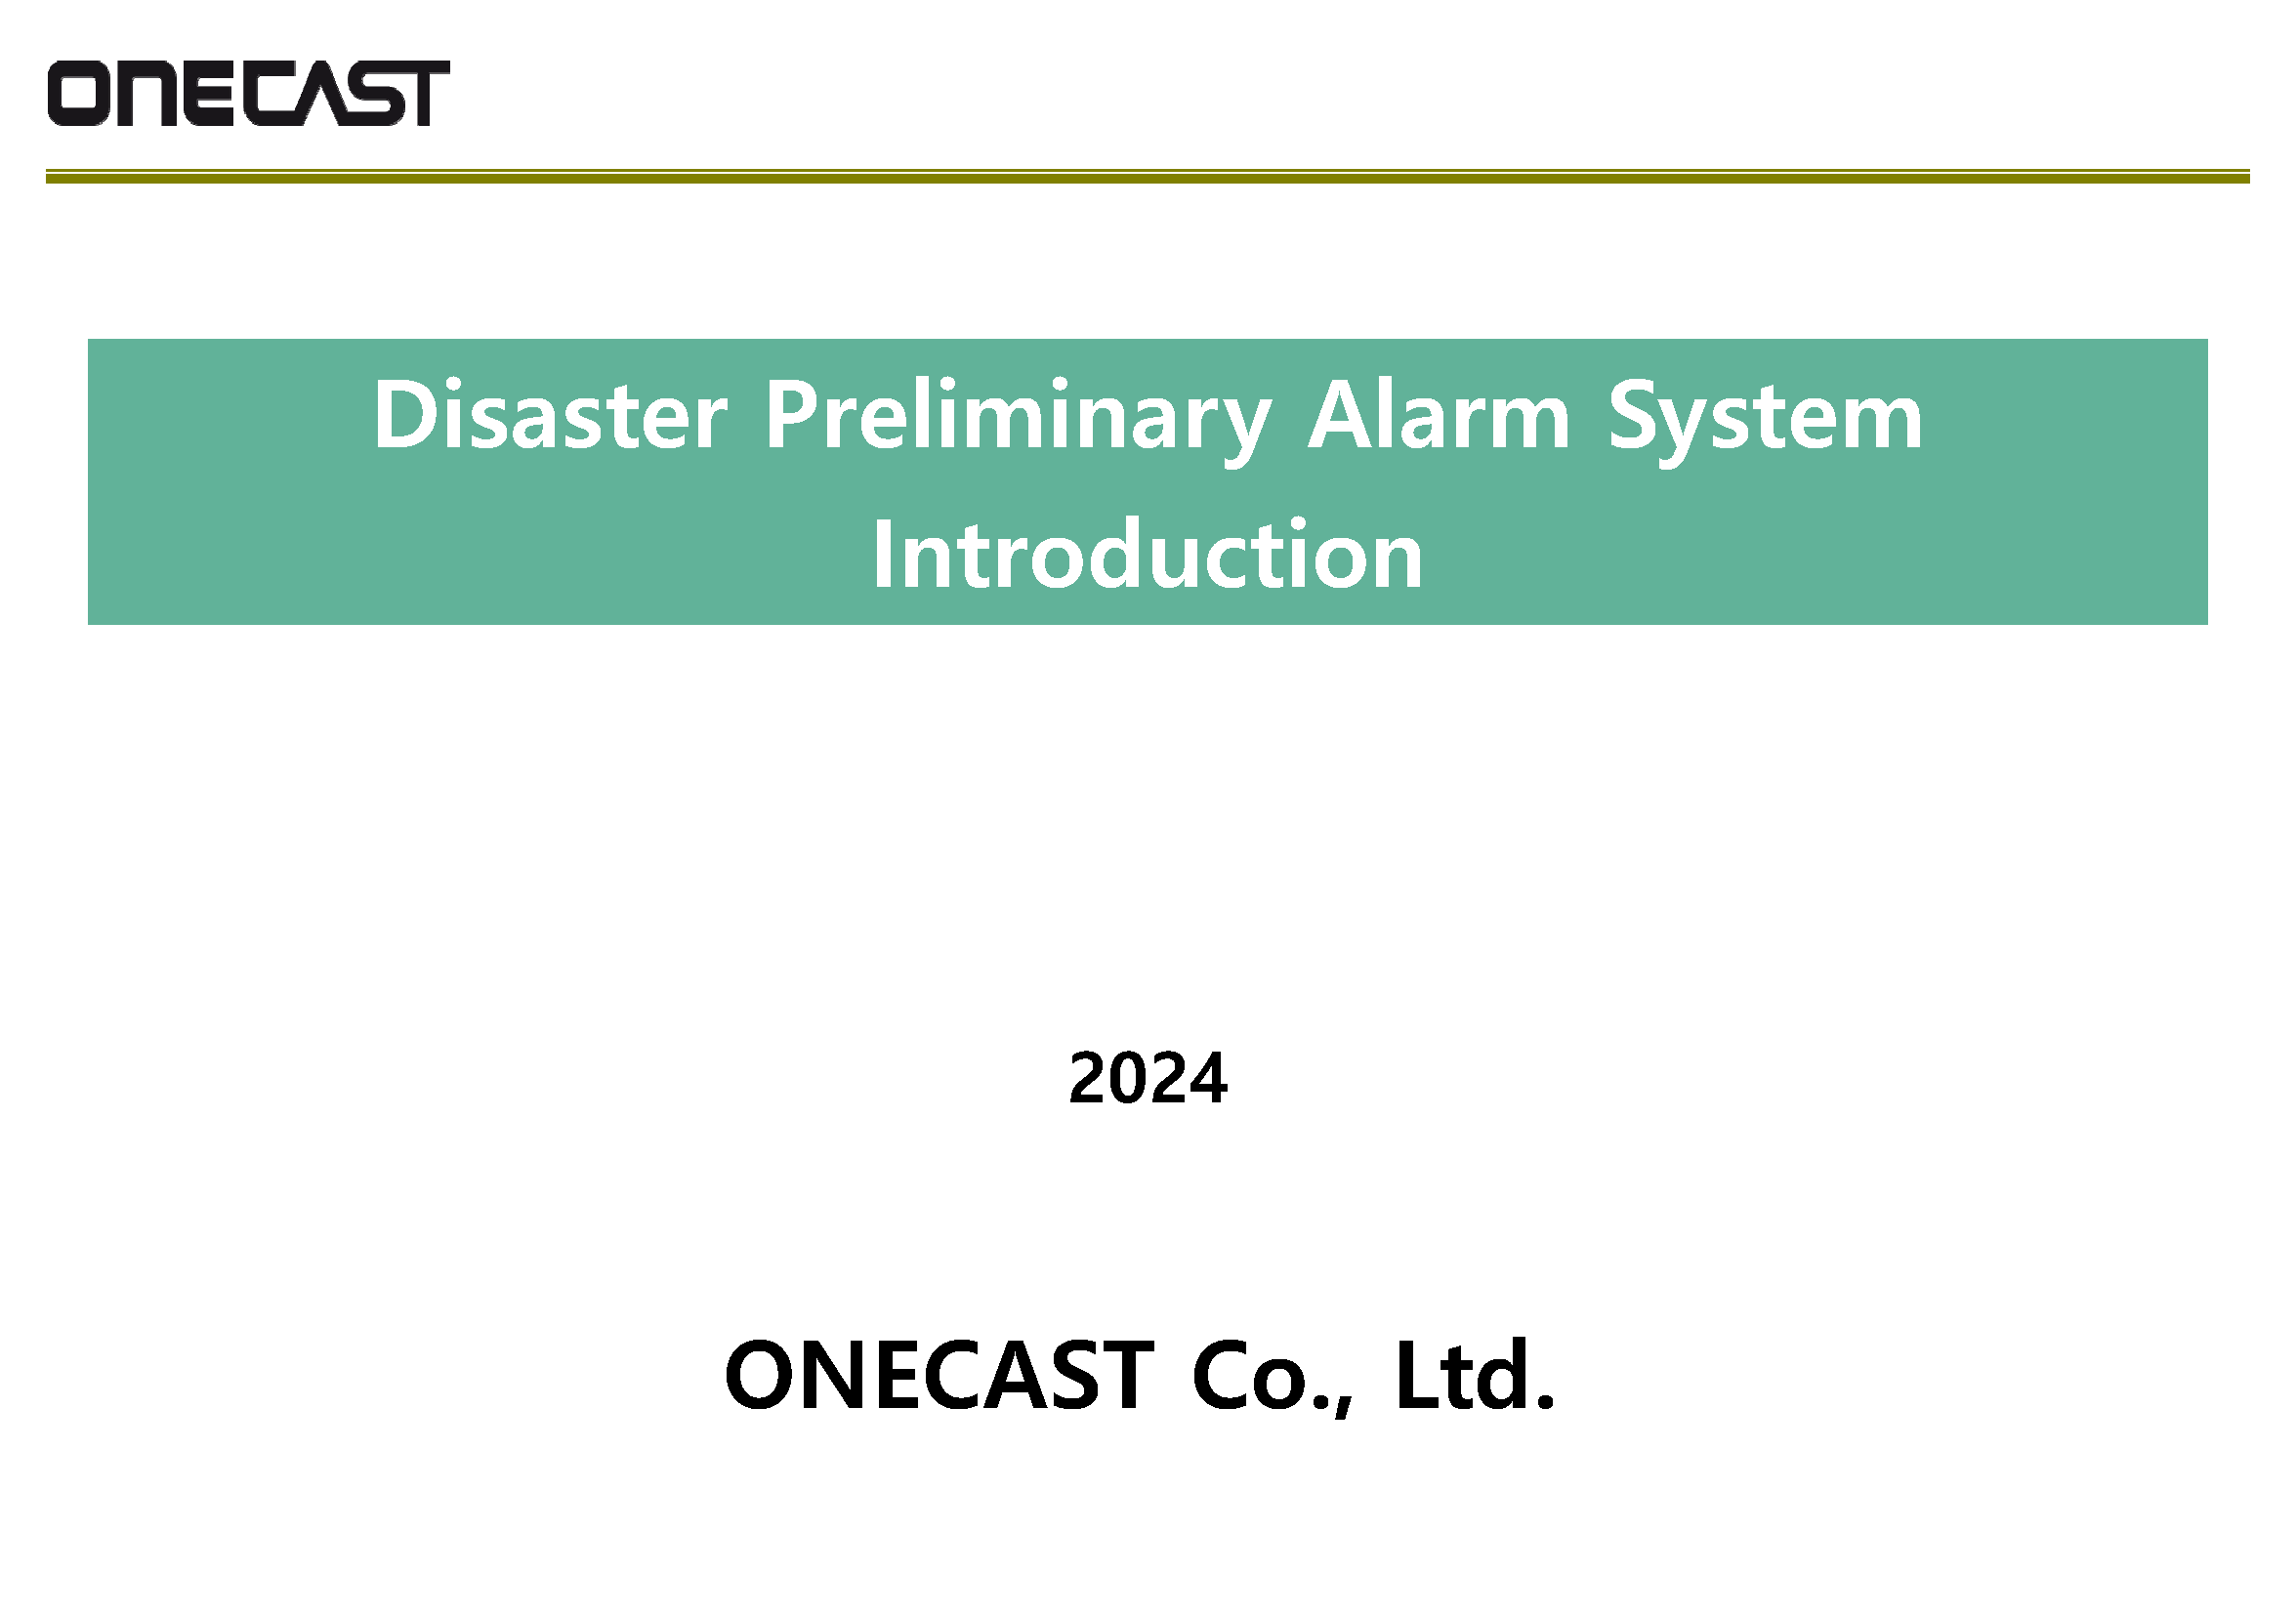 Disaster Preliminary Alarm System Inroduction